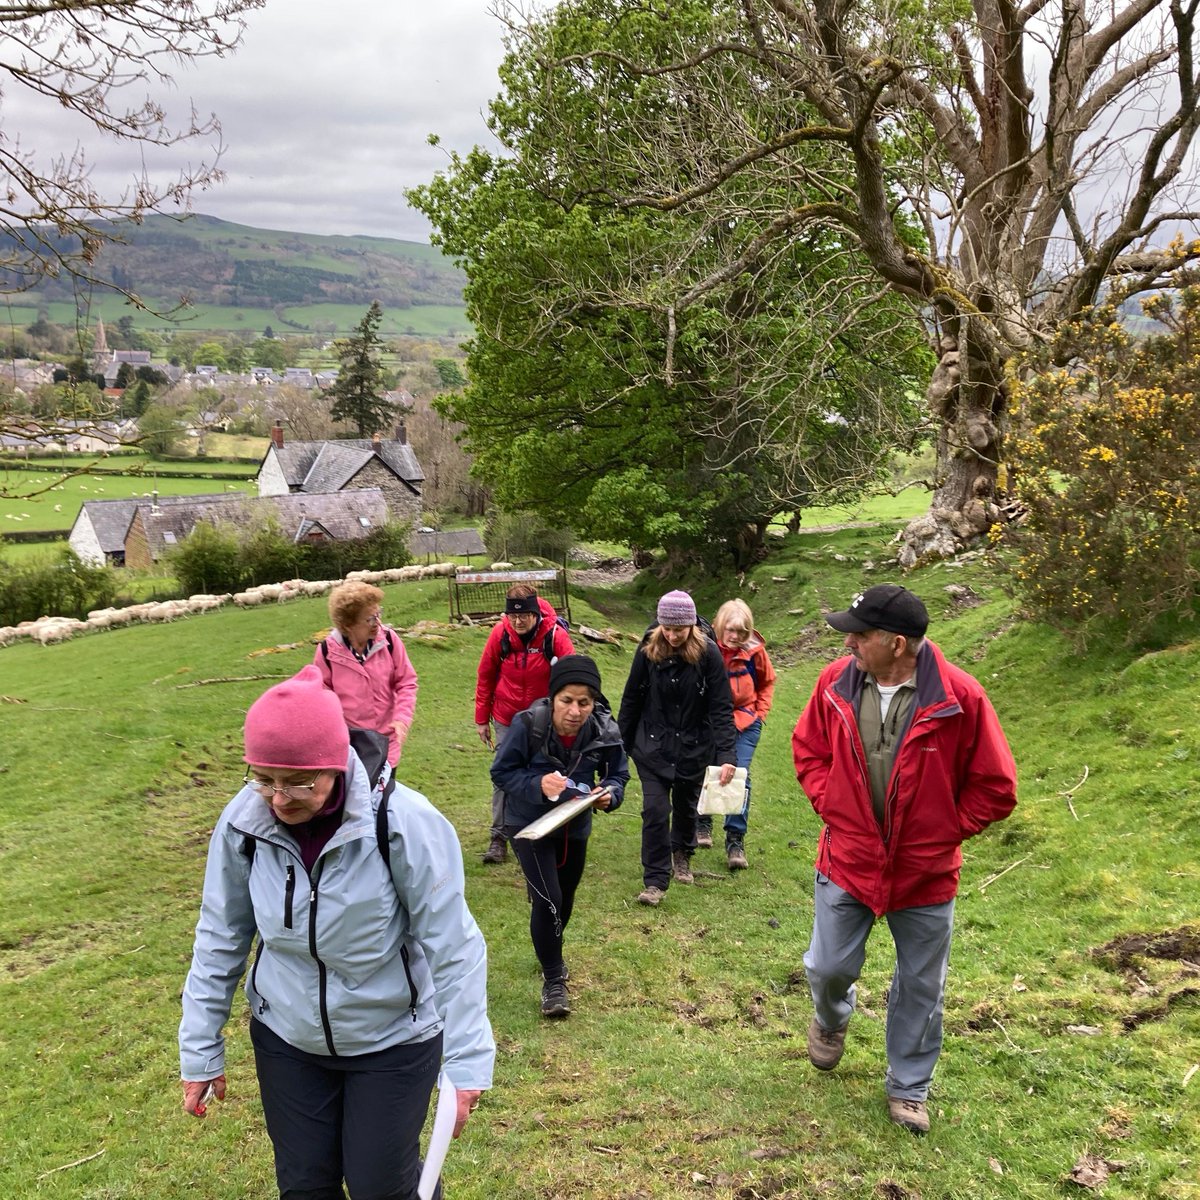 Great turnout for our Navigation Session today in Llandrillo🥾⛰️🧭 These sessions aim to encourage people to learn about and enjoy the walking opportunities on their doorstep. After all, our paths are gateways that connect communities! @DenbighshireCC